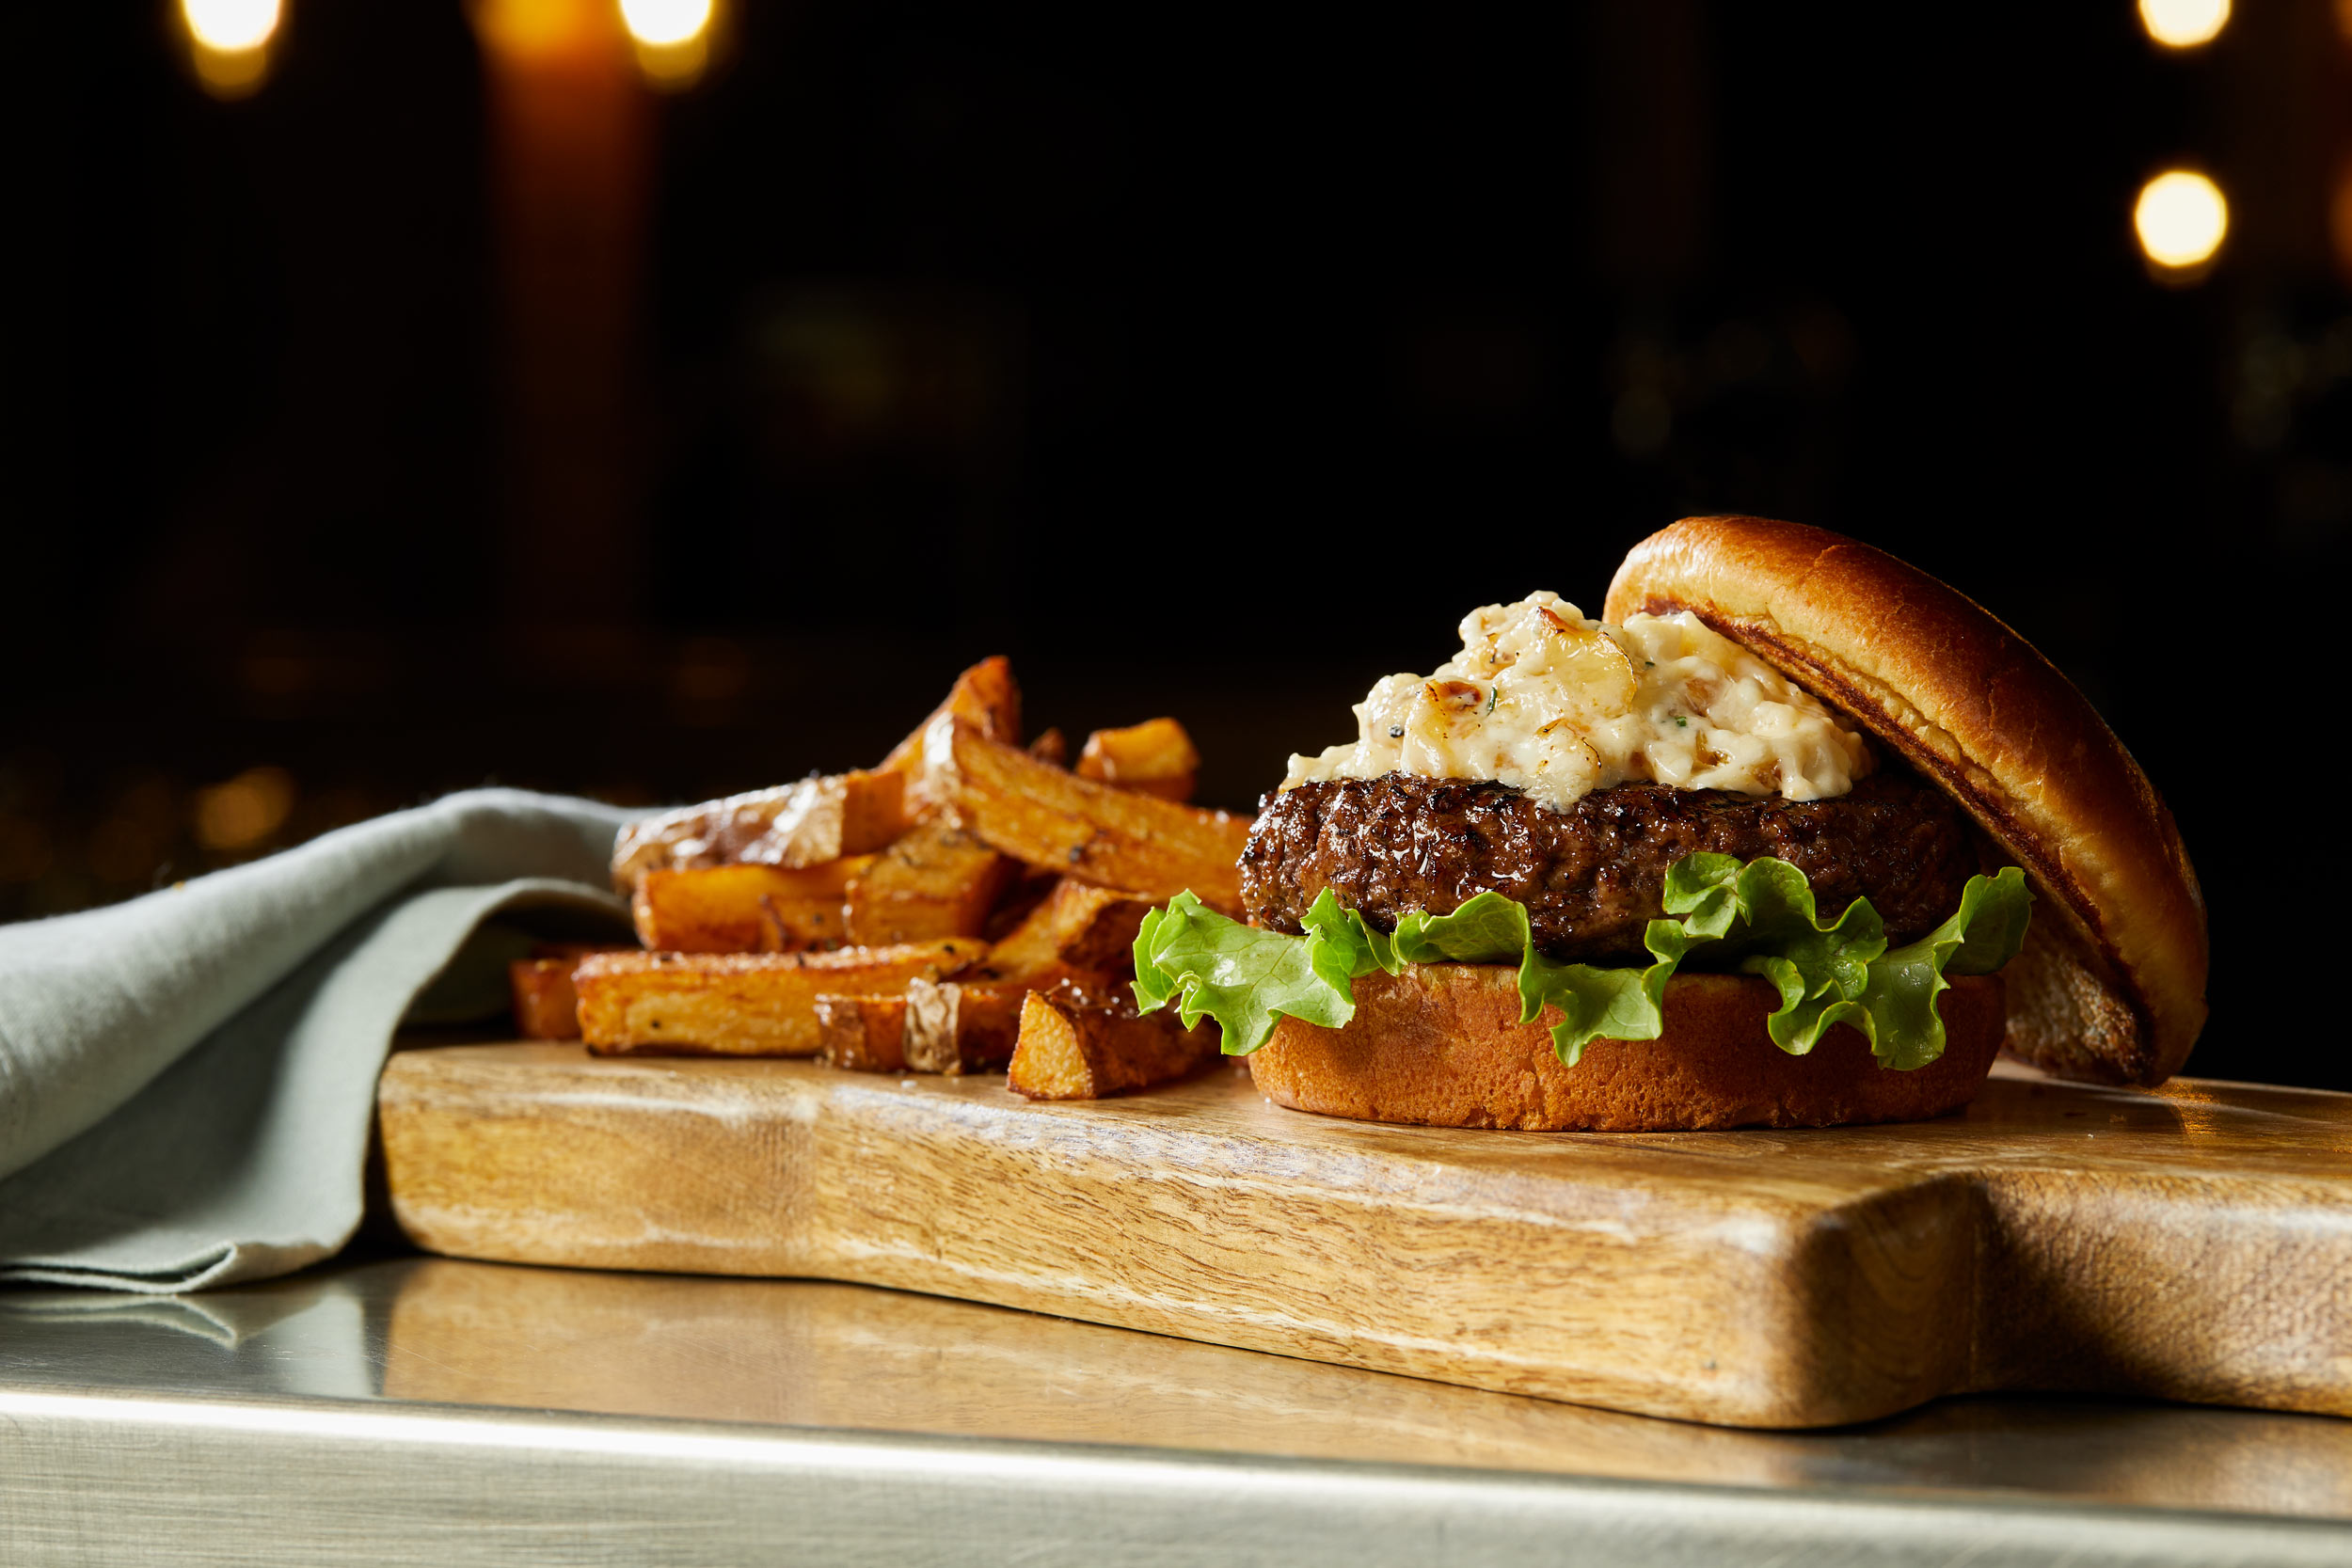 Burger with caramelized onions photo by Chris Kessler Photography.  Chris Kessler is a freelance Photographer based in Milwaukee Wisconsin. Specializing in Food photography and portraiture.